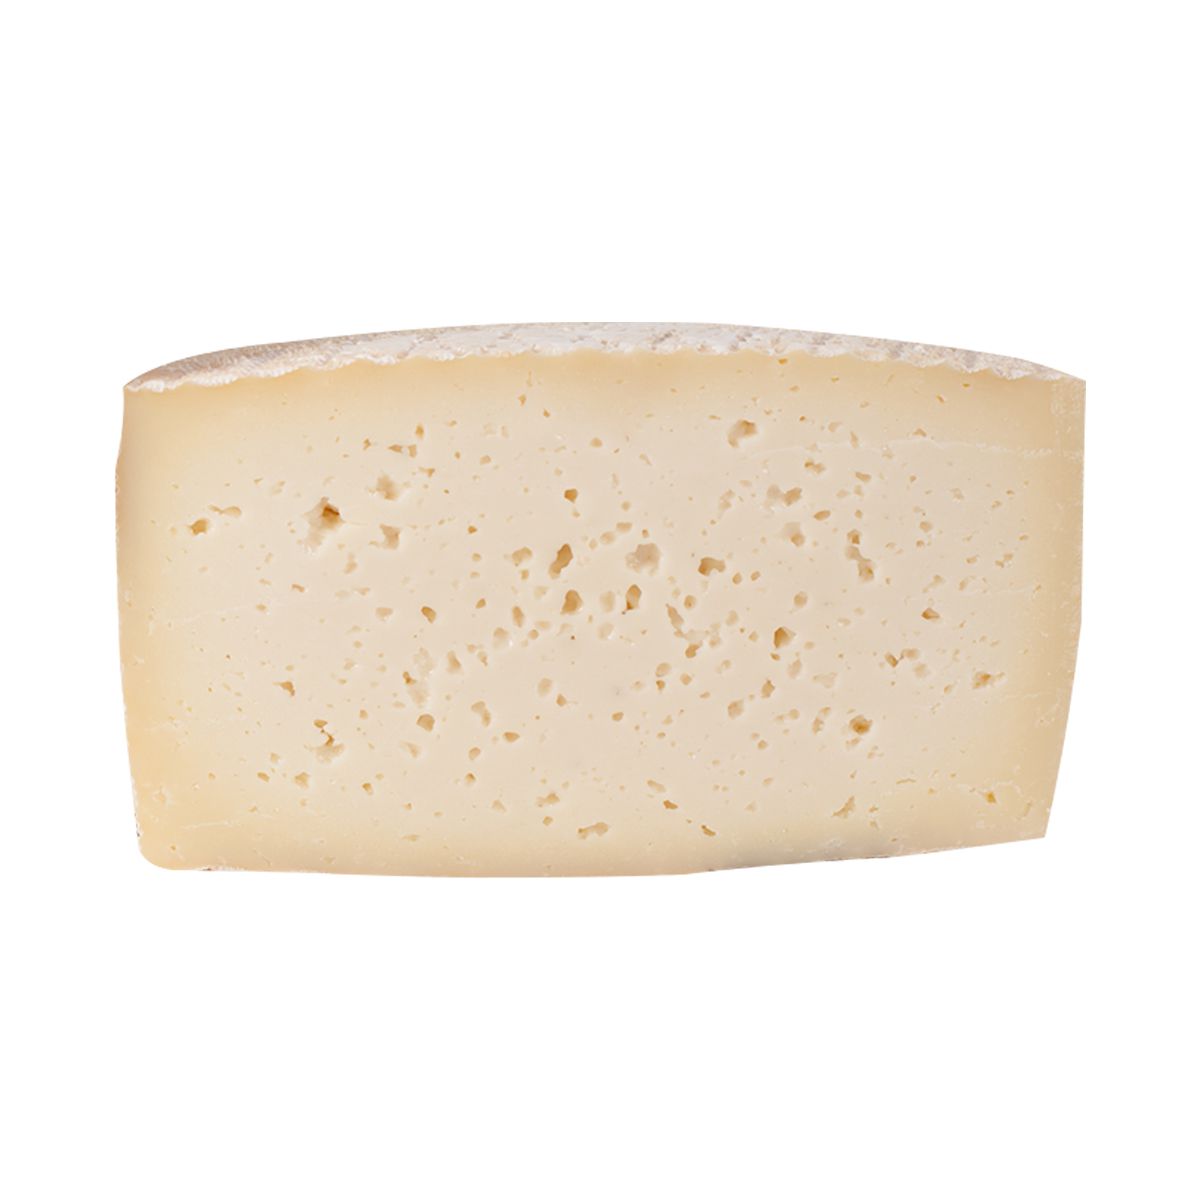 Artequeso Manchego 4 Month Aged Cheese Wheel